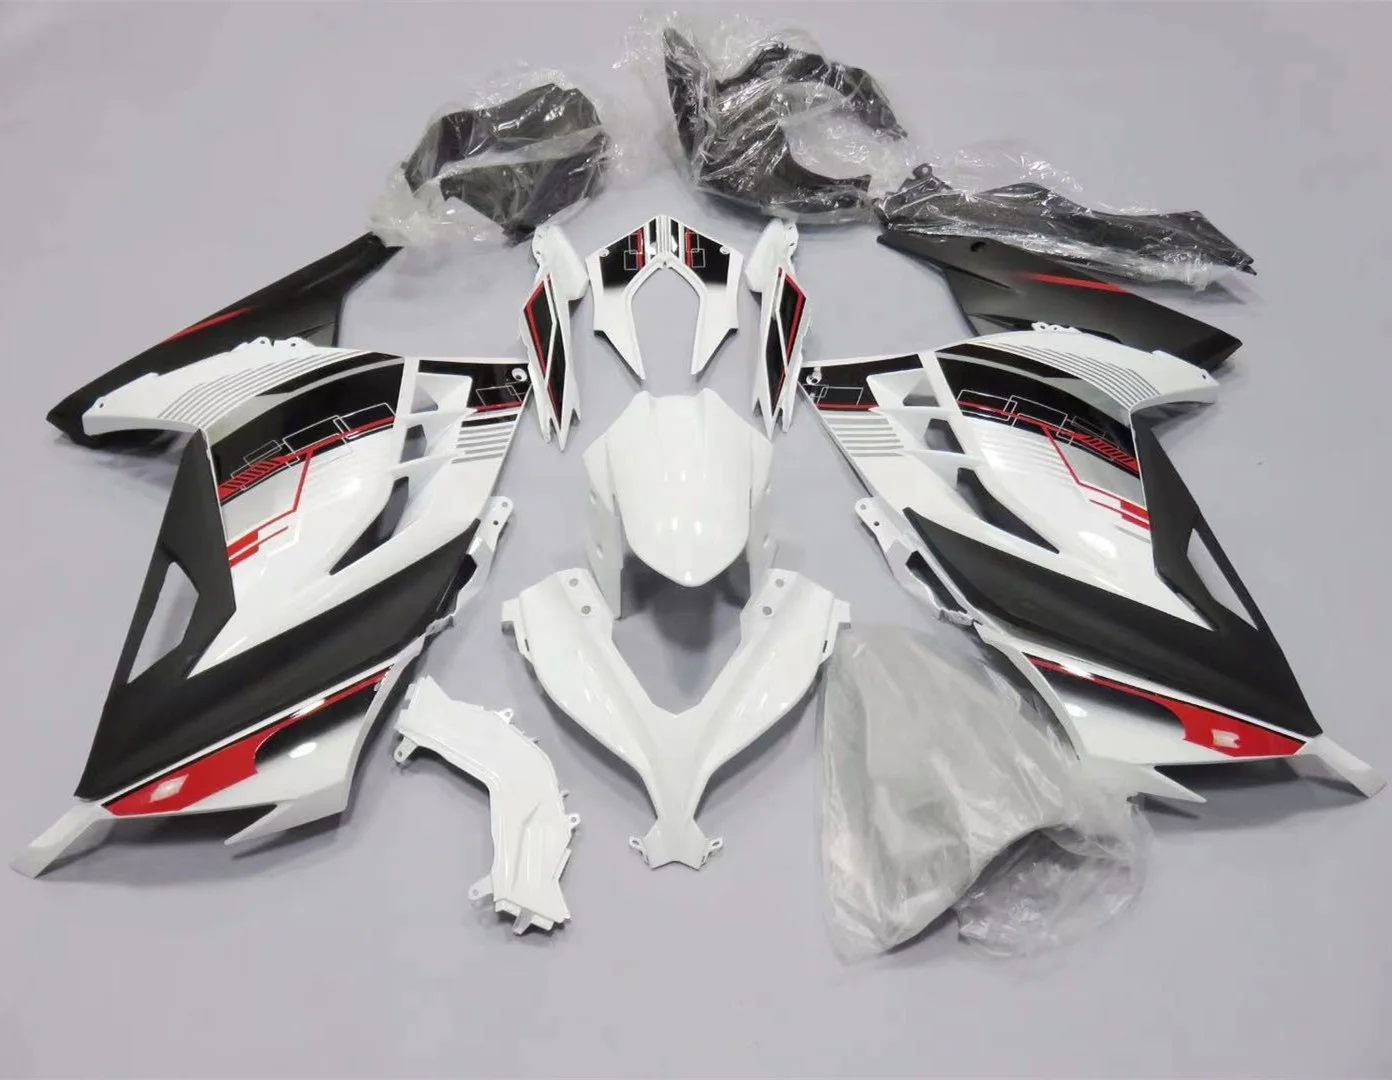 

2022 WHSC Fairing Bodywork Complete Set Fit For KAWASAKI Ninja 300 2013-2016, Pictures shown